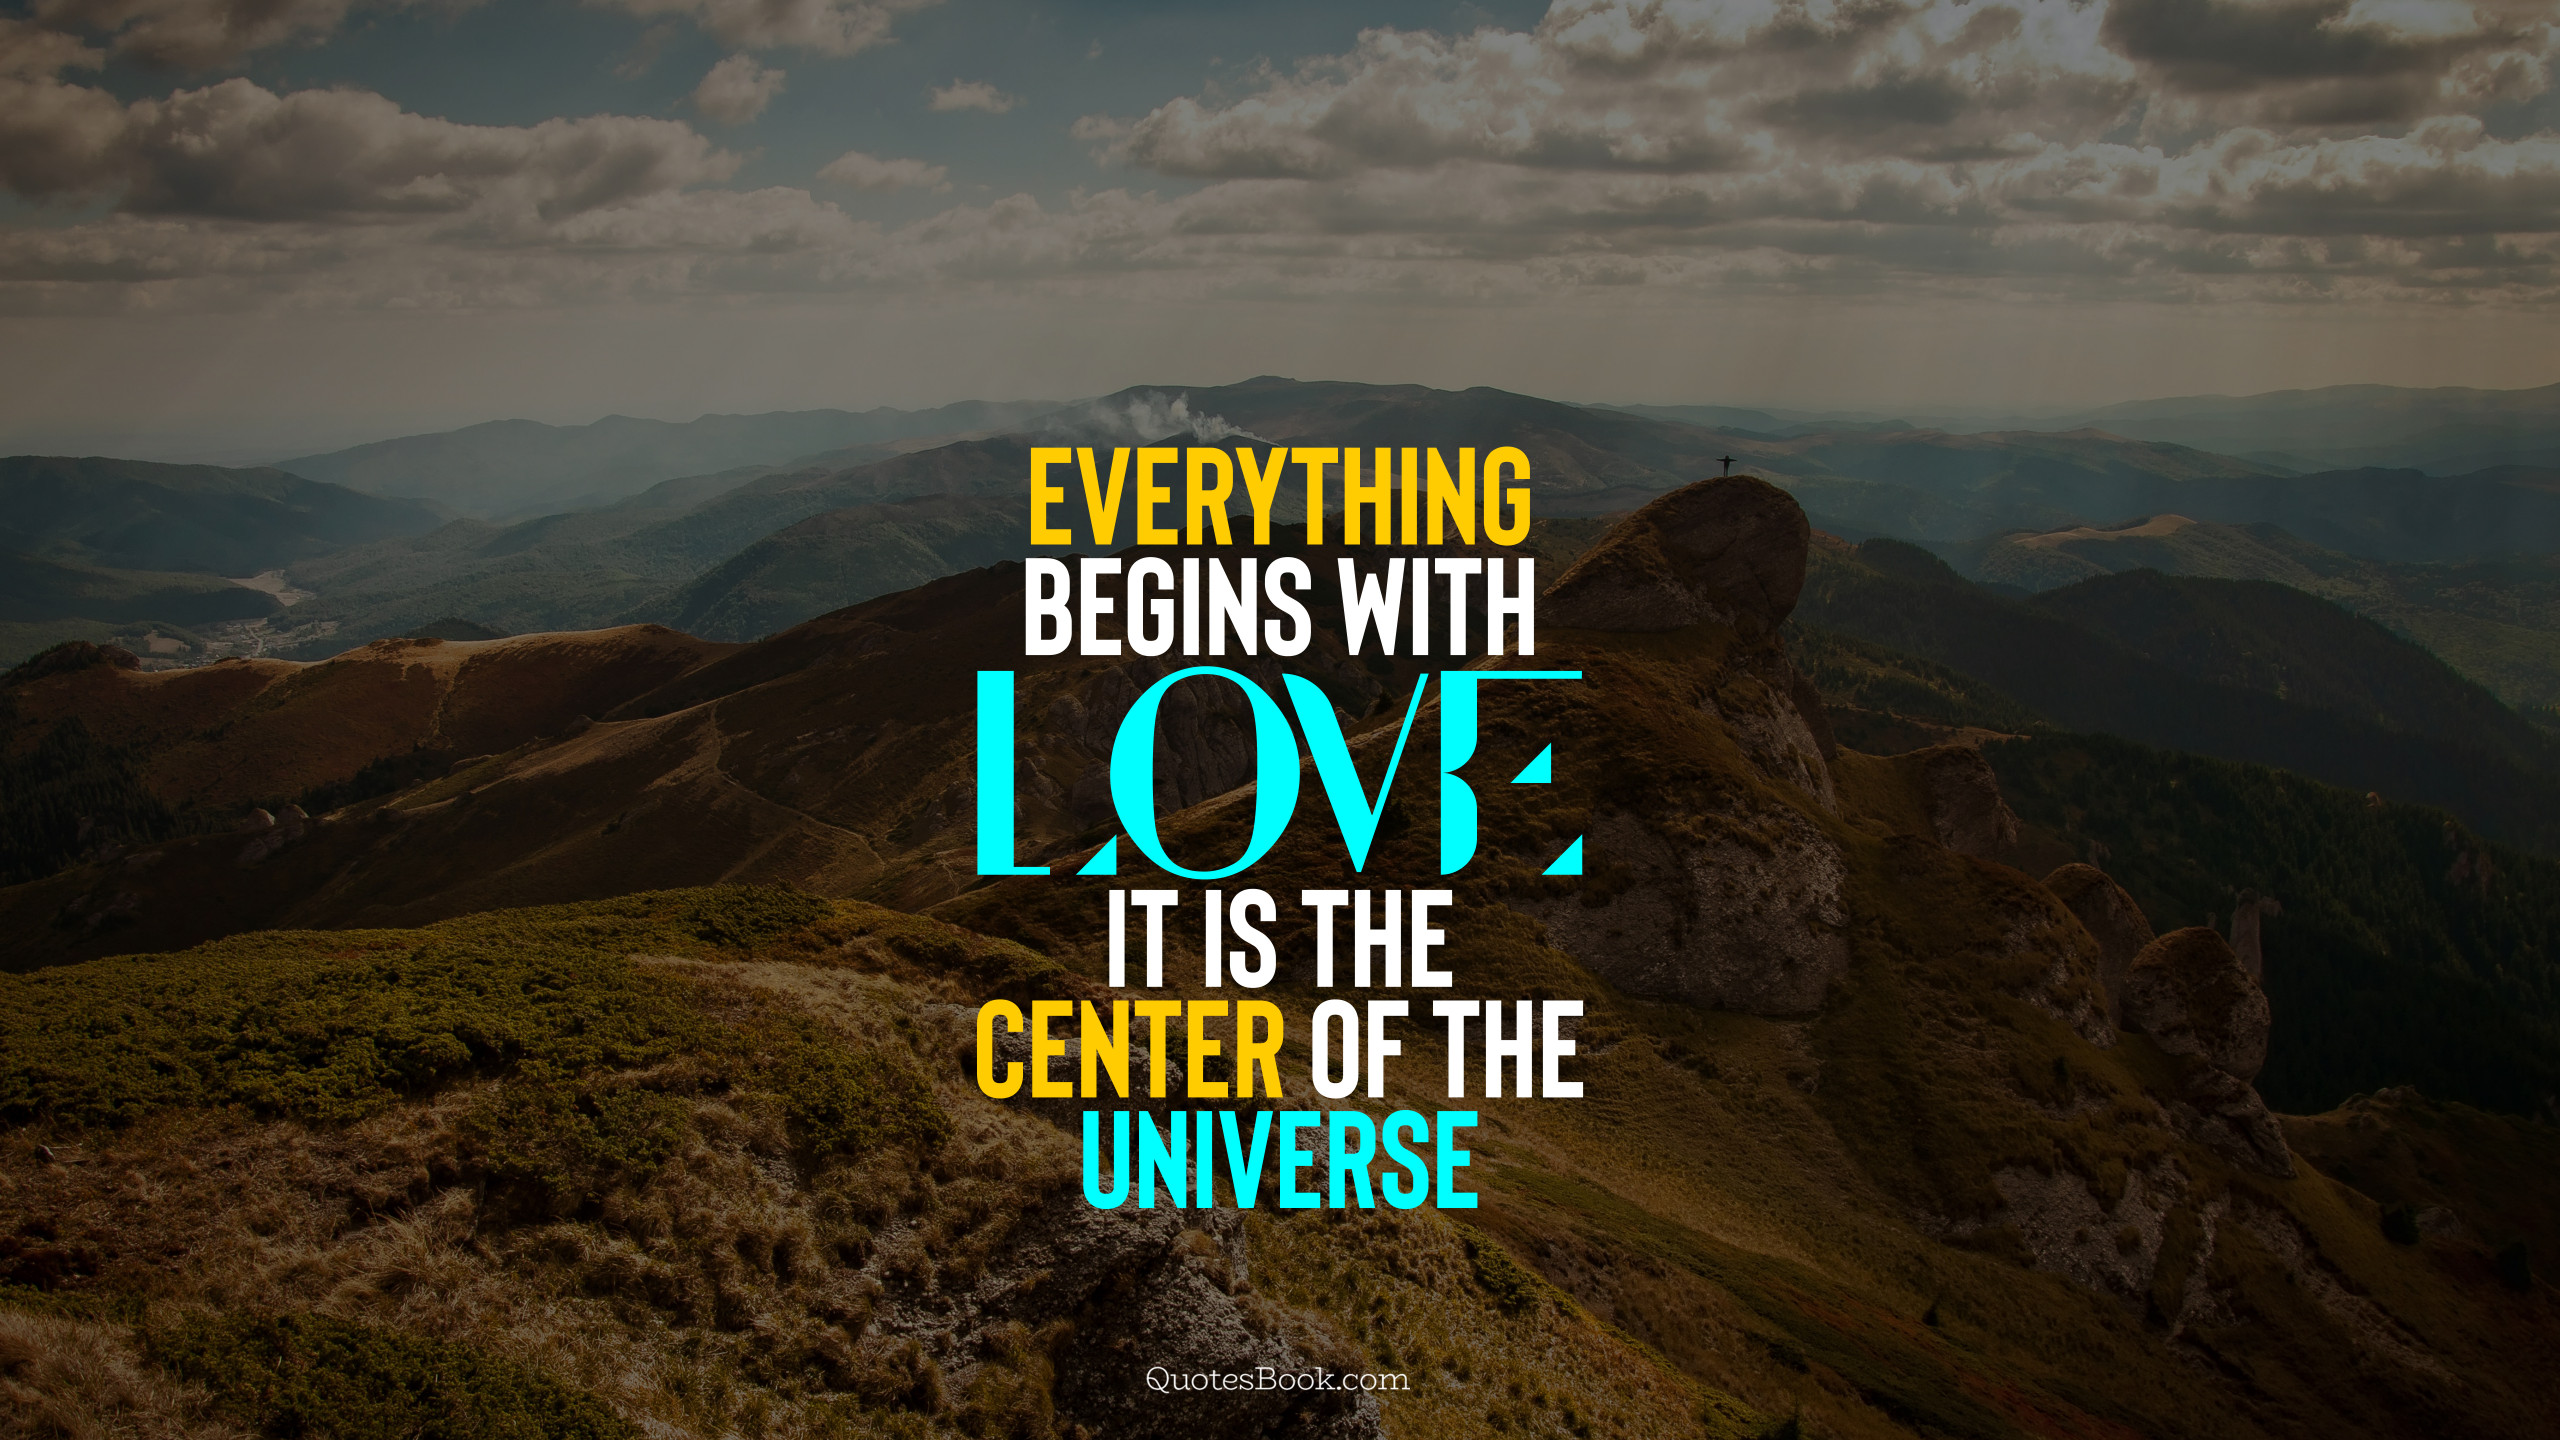 Everything begins with love. It is the center of the Universe. - Quote